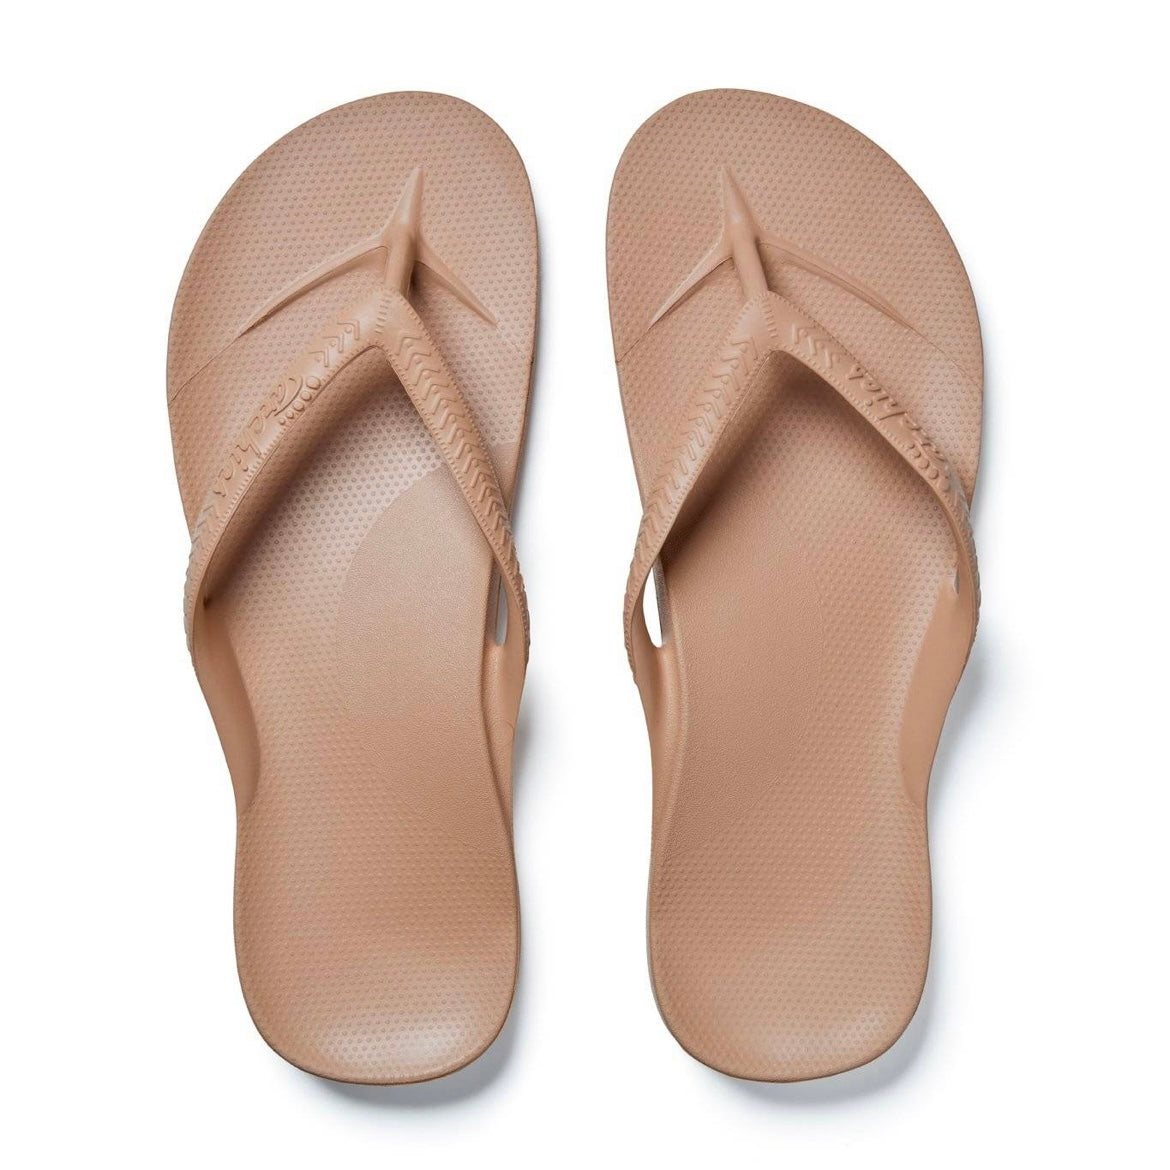 Archies Tan Arch Support Thongs Flip Flop Orthotic